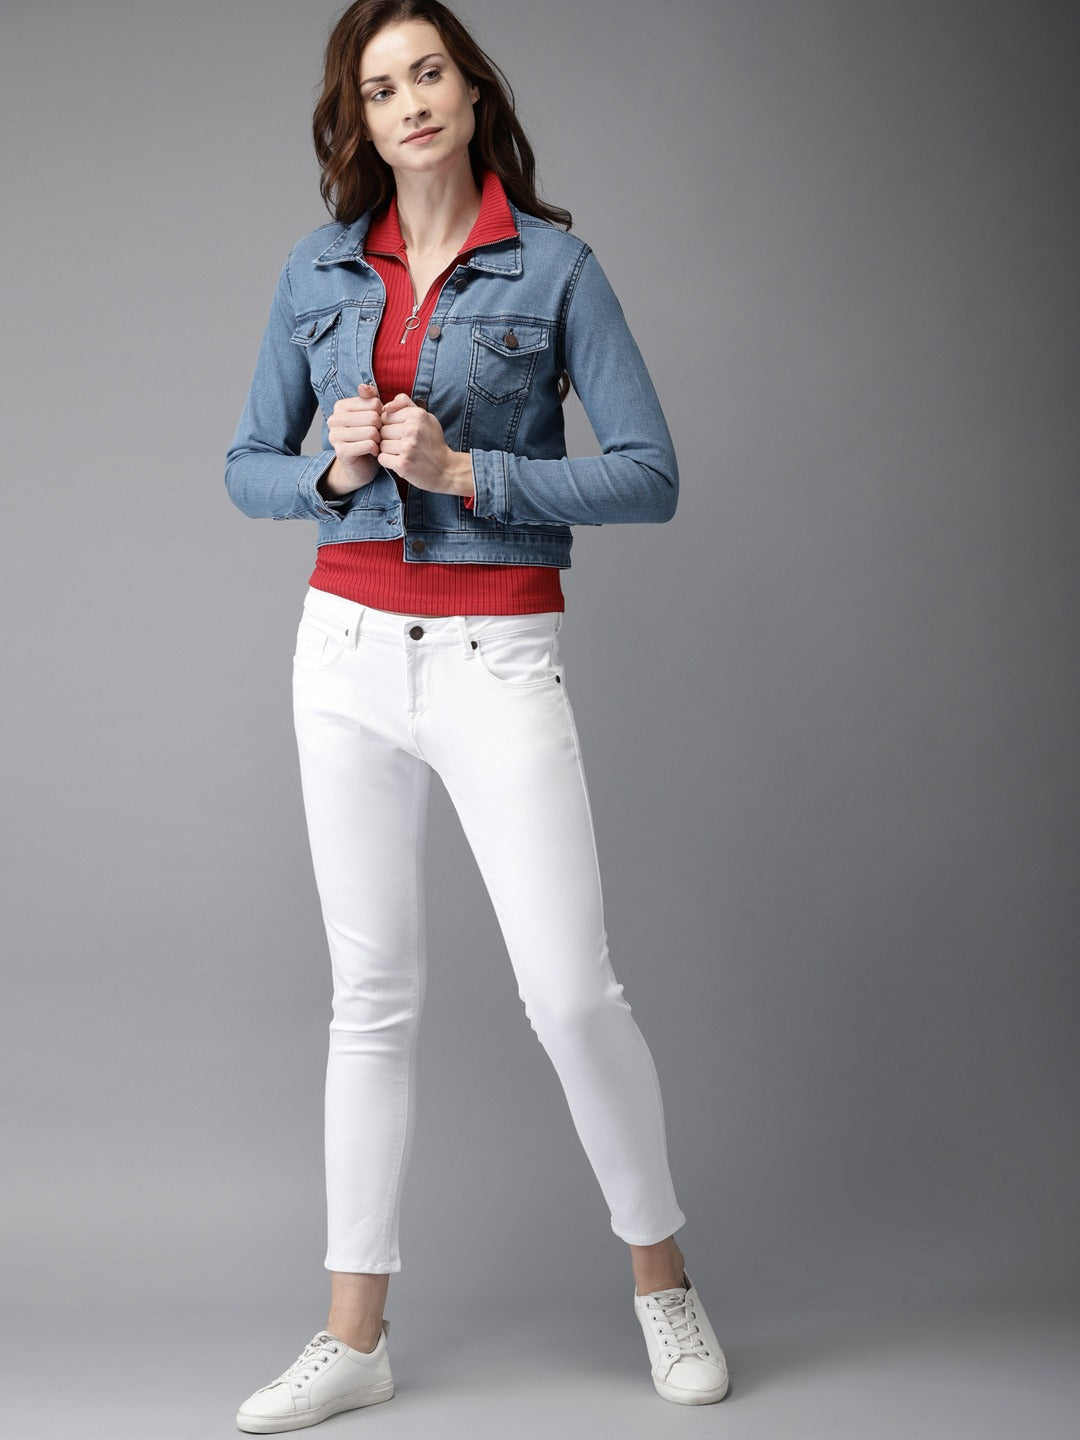 Stylish women's blue denim jacket, red crop top, and white jeans on model against grey background.